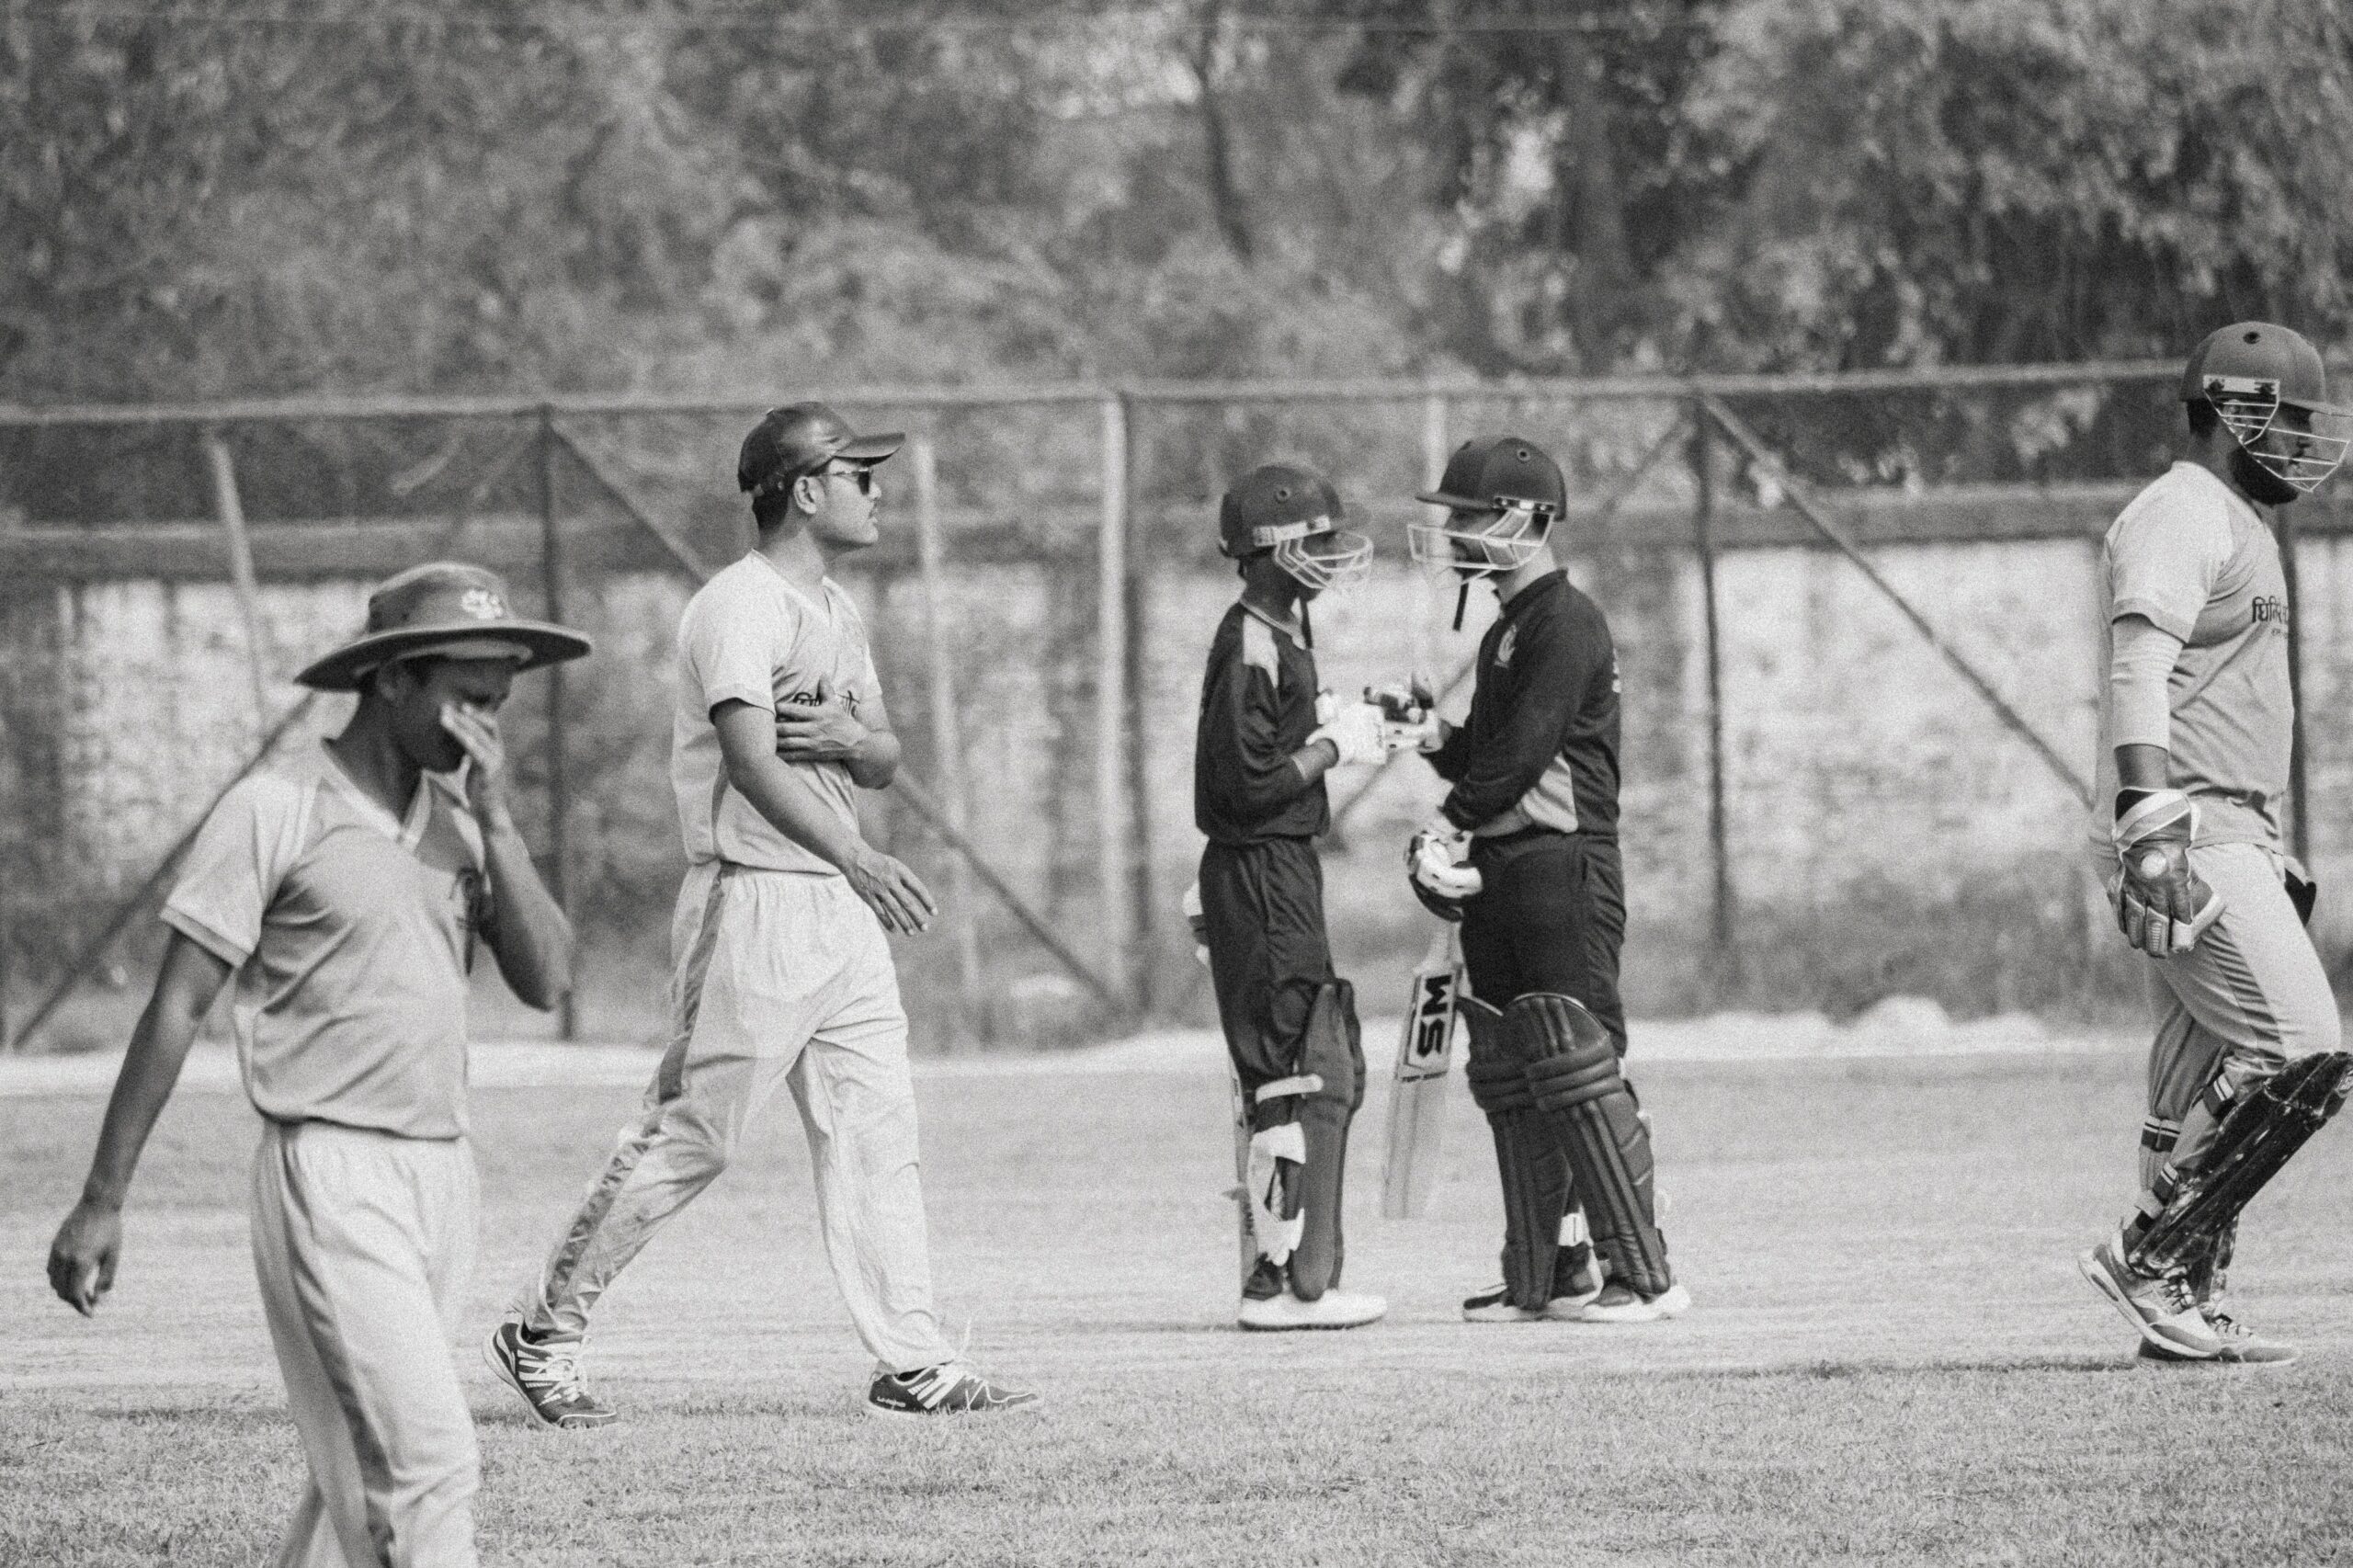 conversation between two cricket players